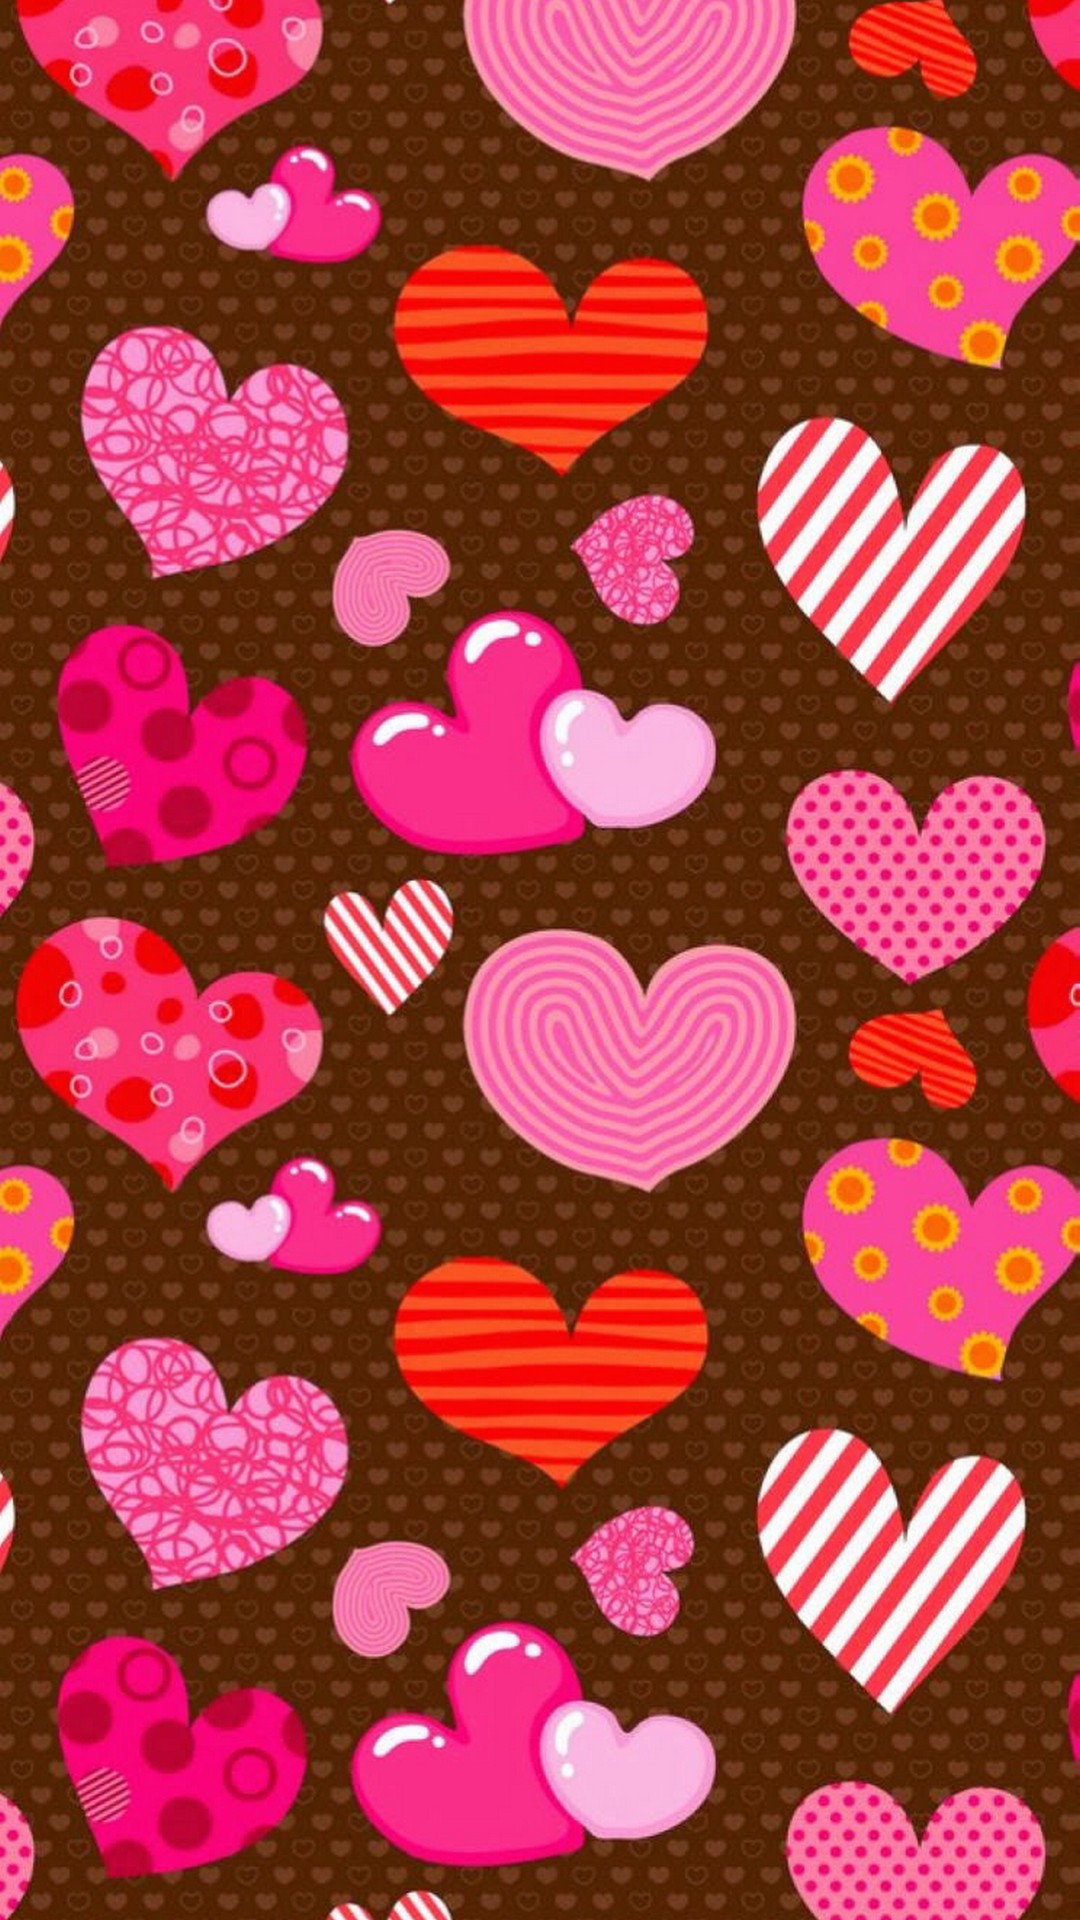 Valentine Image Wallpaper Android Android Wallpaper